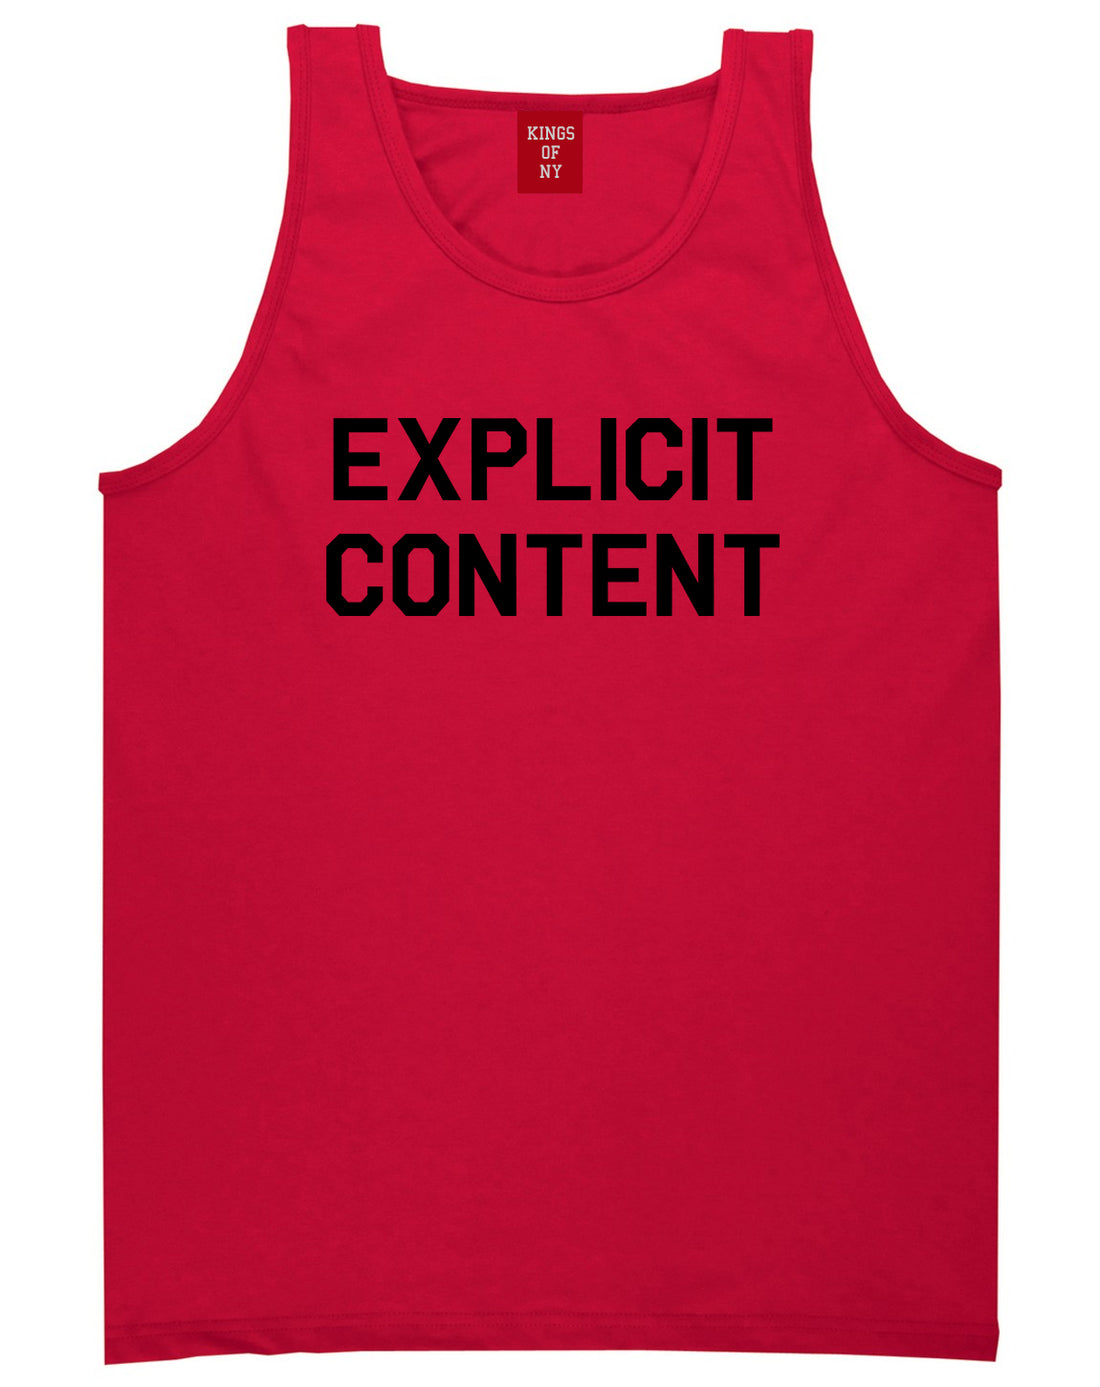 Explicit_Content Mens Red Tank Top Shirt by Kings Of NY